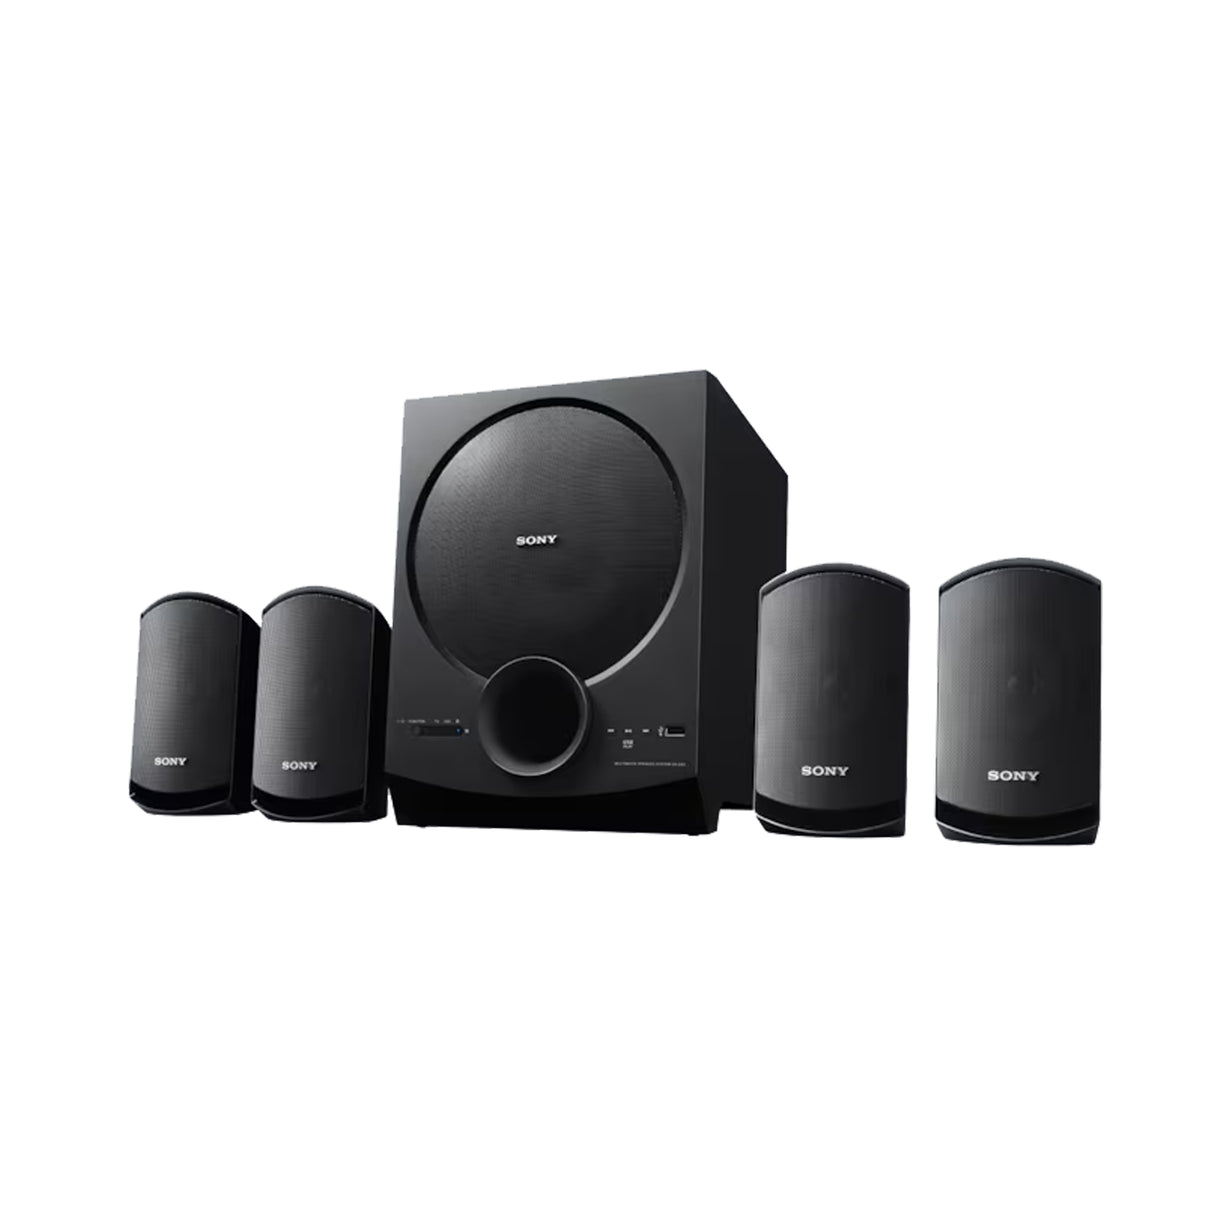 Sony SA-D40 - 4.1 Channel Multimedia Speaker System with Bluetooth (Black)(80 Watts)